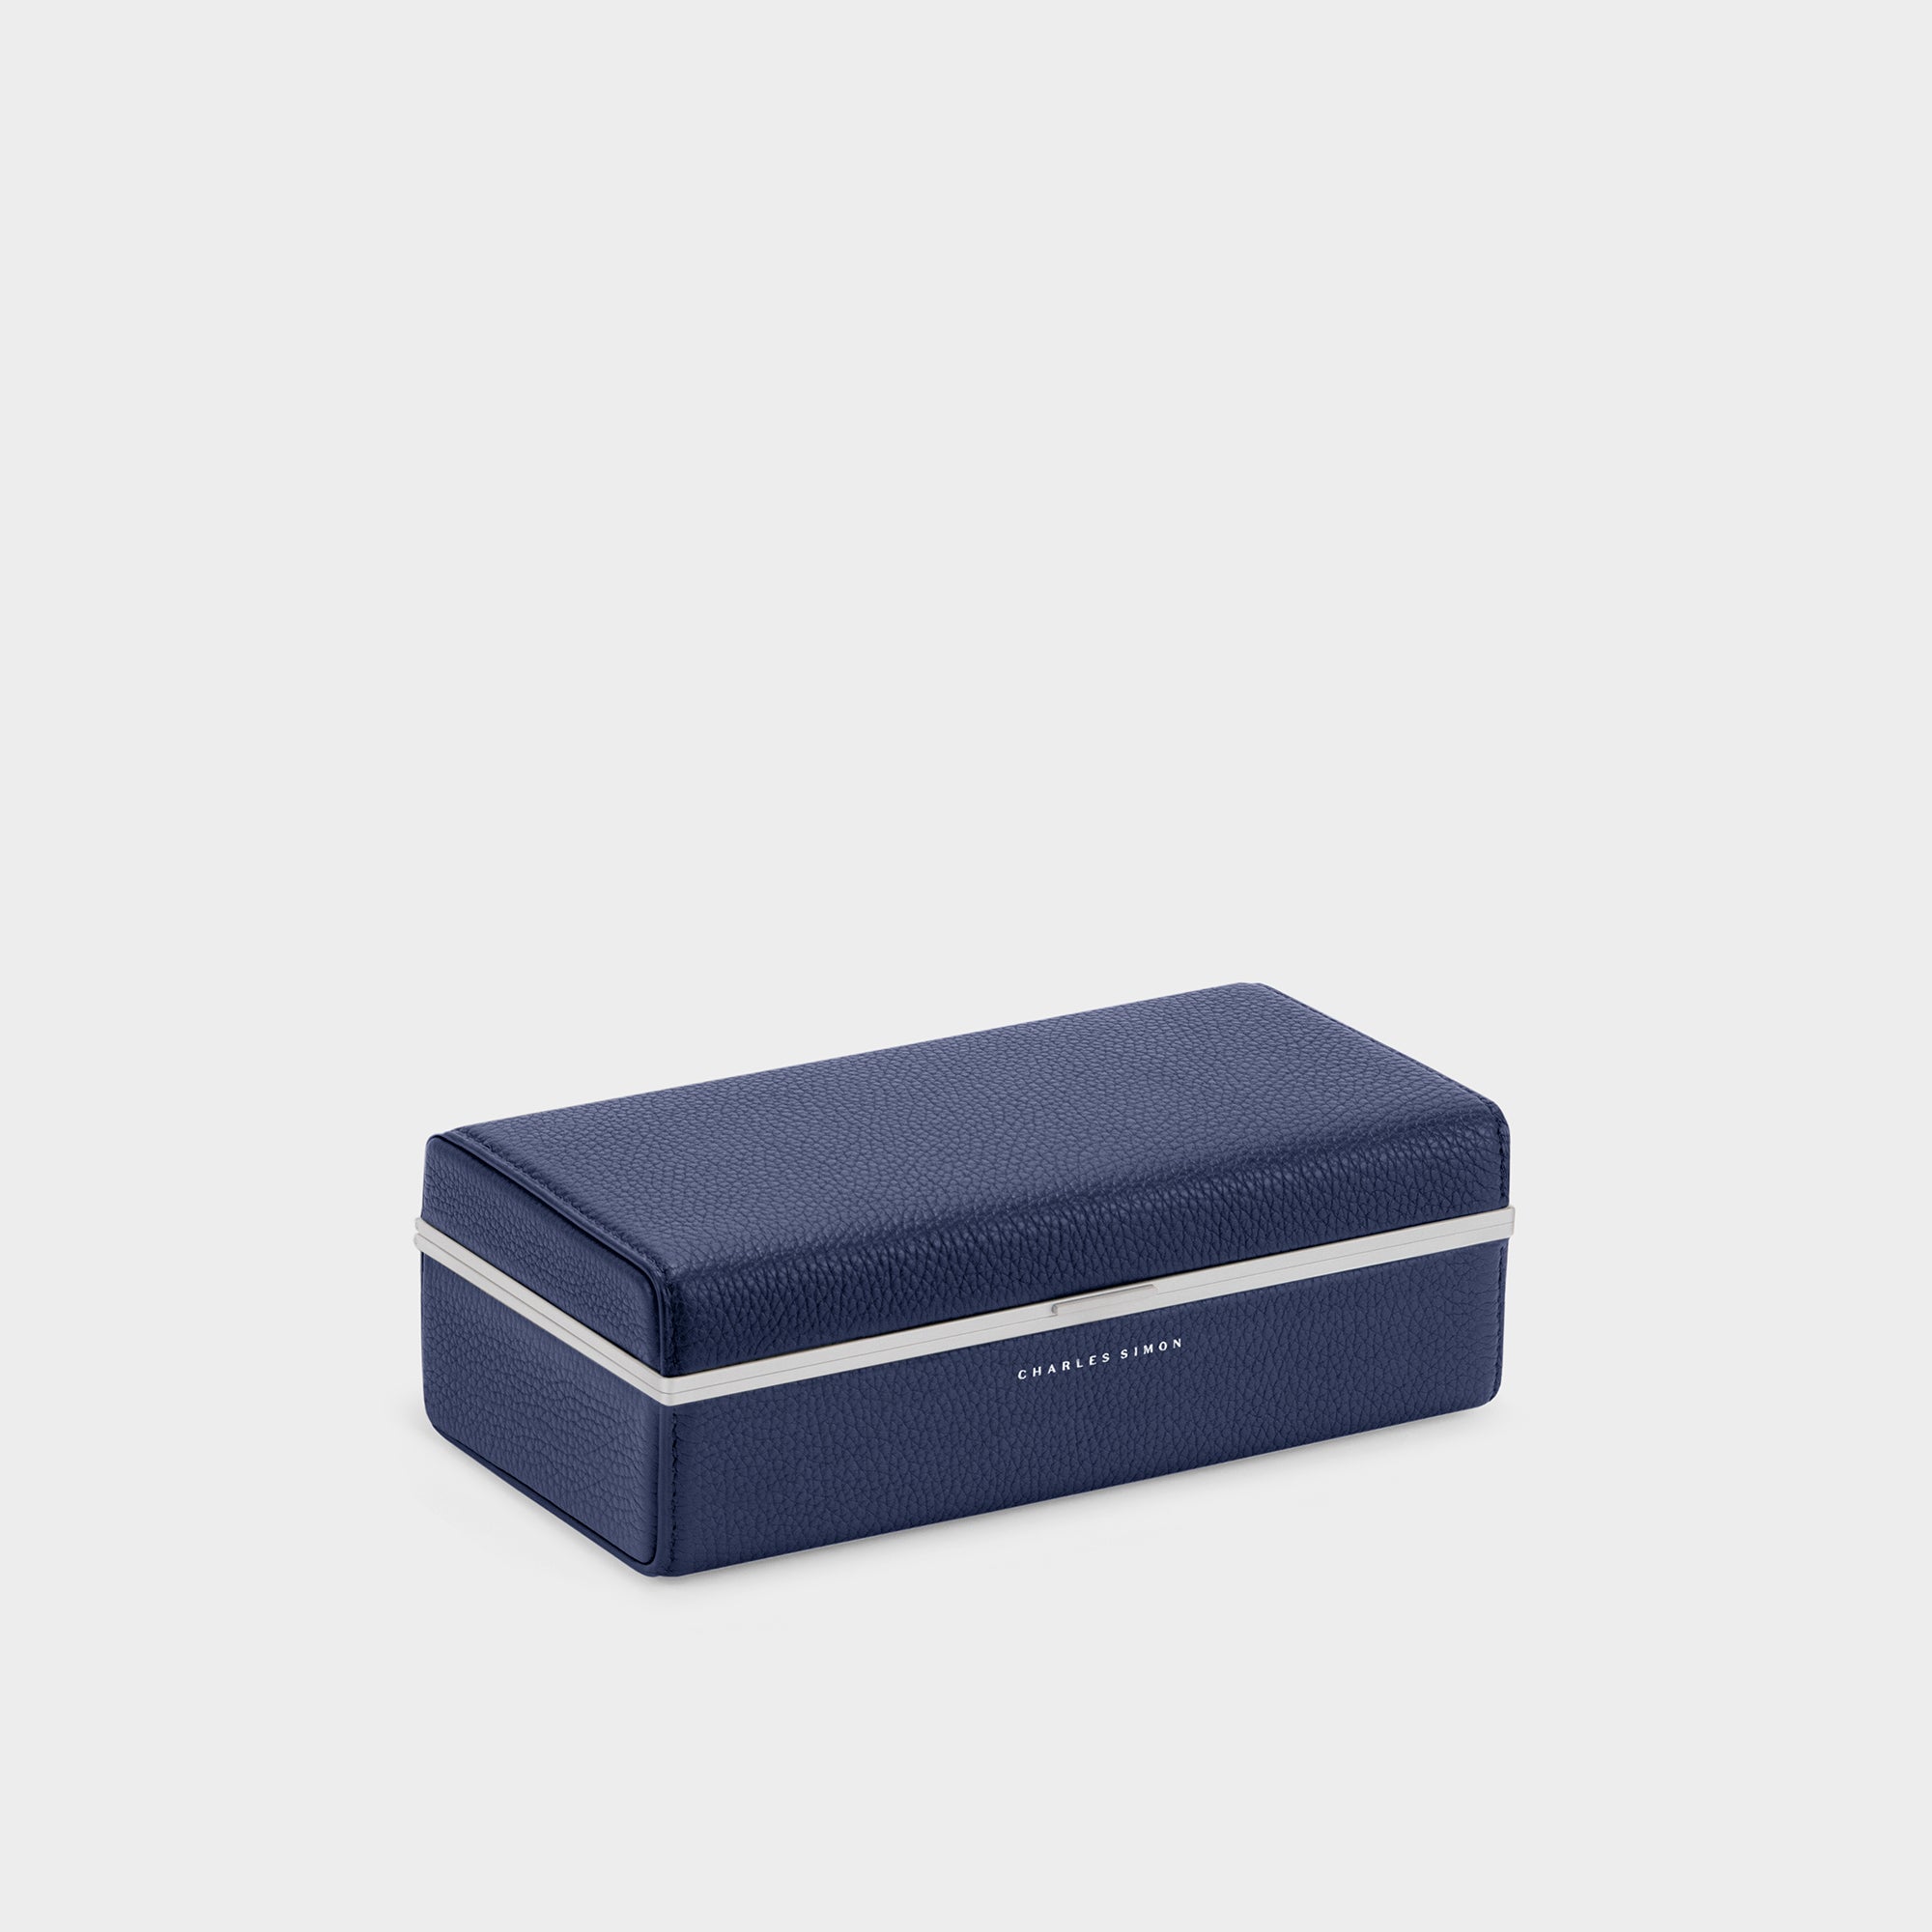 Charles Simon leather watch case in sapphire